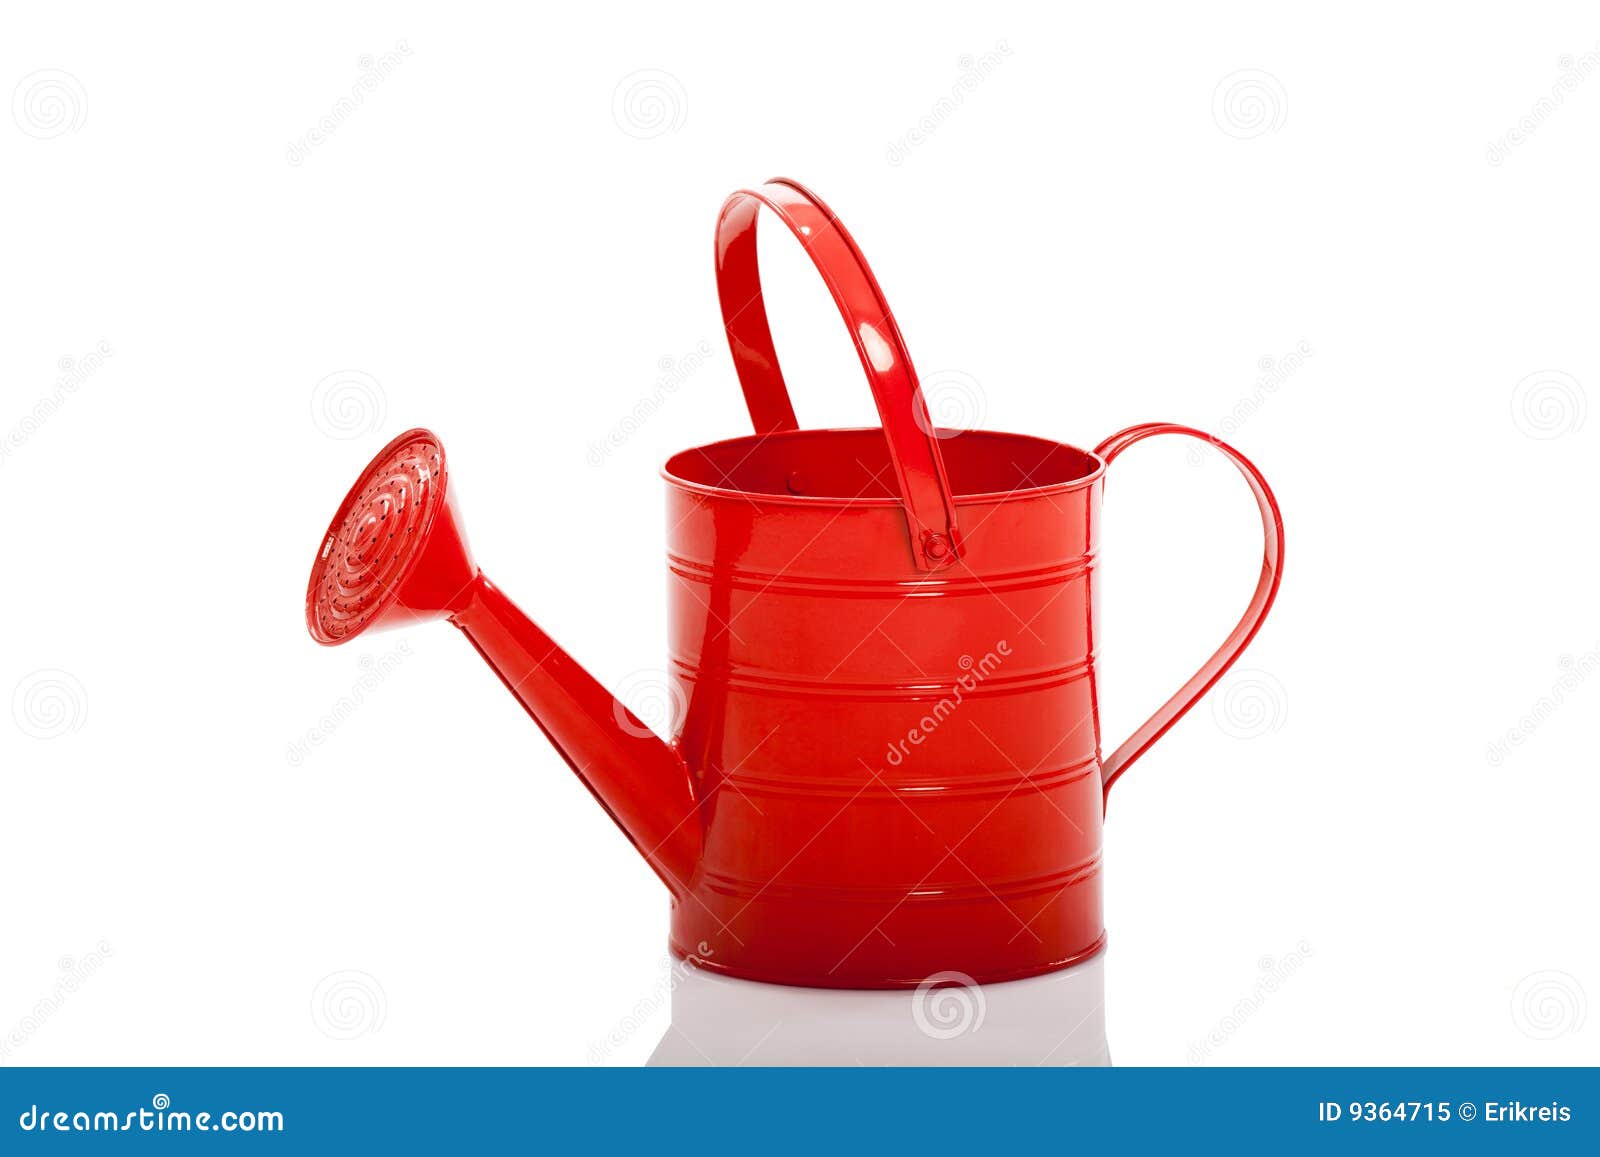 Watering can stock image. Image of watering, objects, tools - 9364715